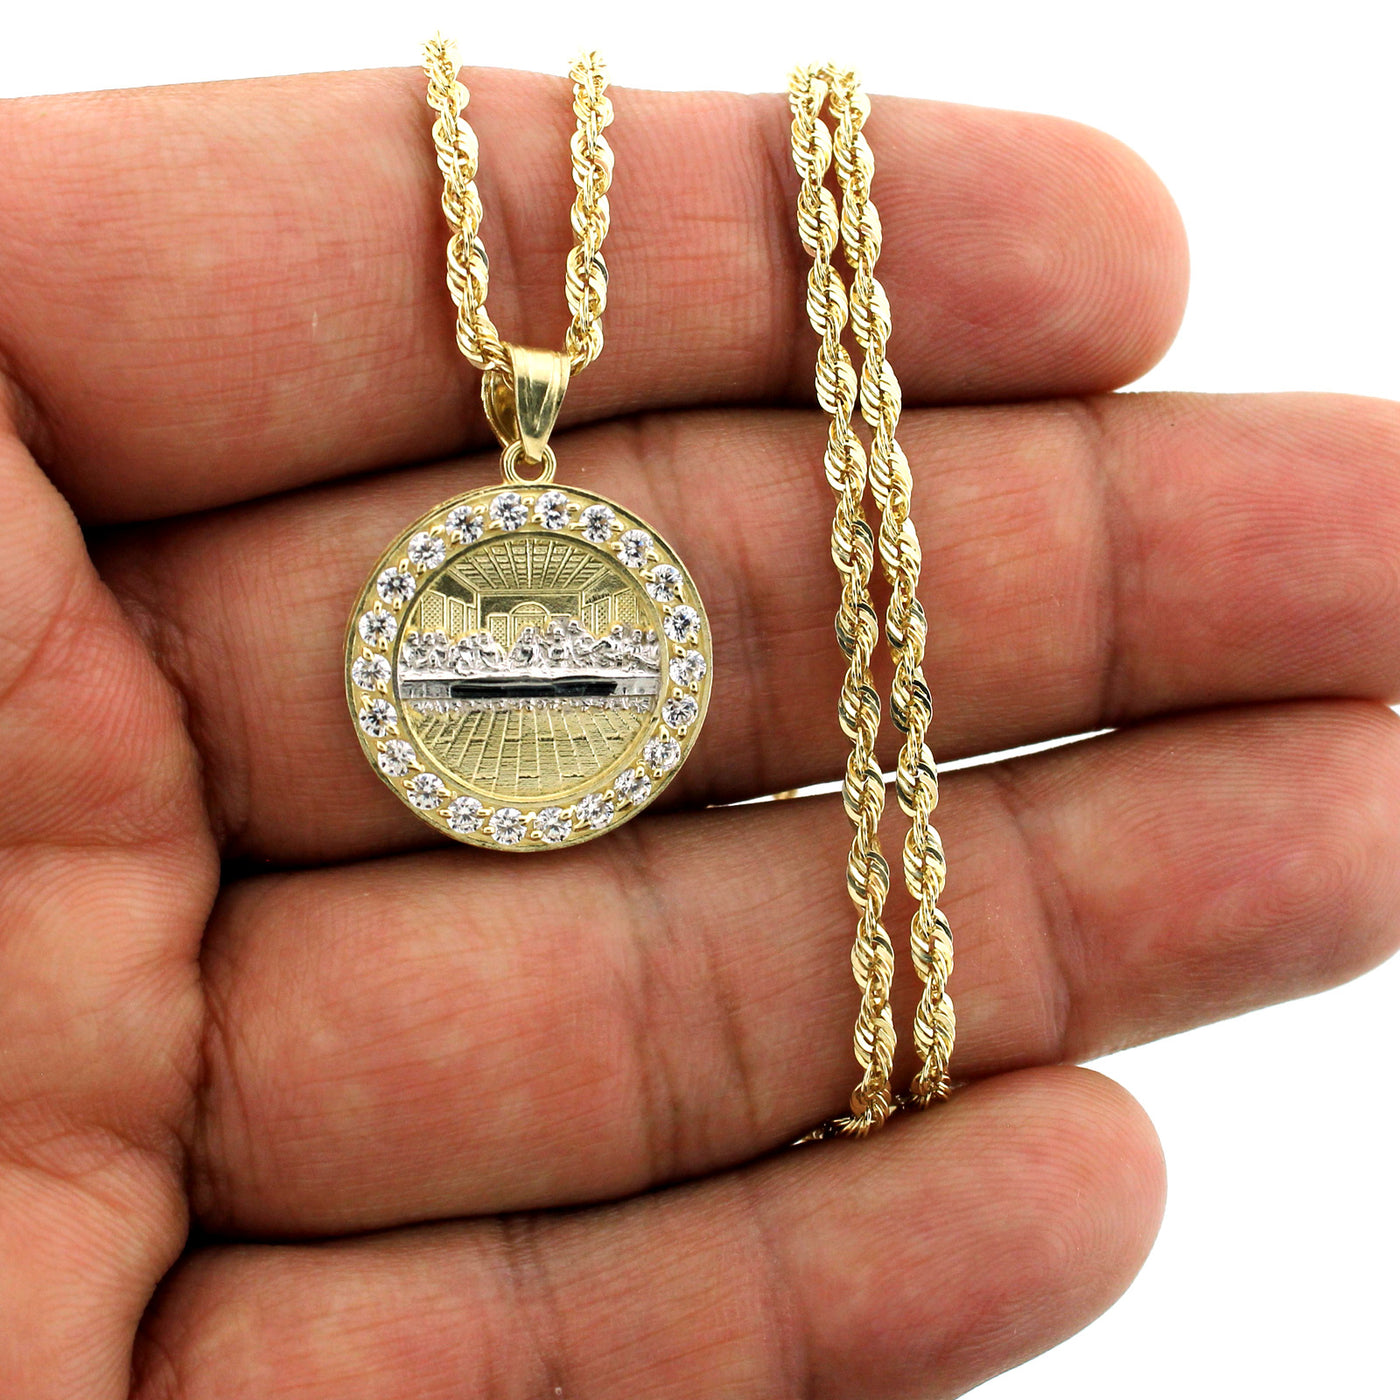 Mens Real 10K Yellow Gold Jesus Last Supper CZ Charm Pendant & 2.5mm Rope Chain Necklace Set